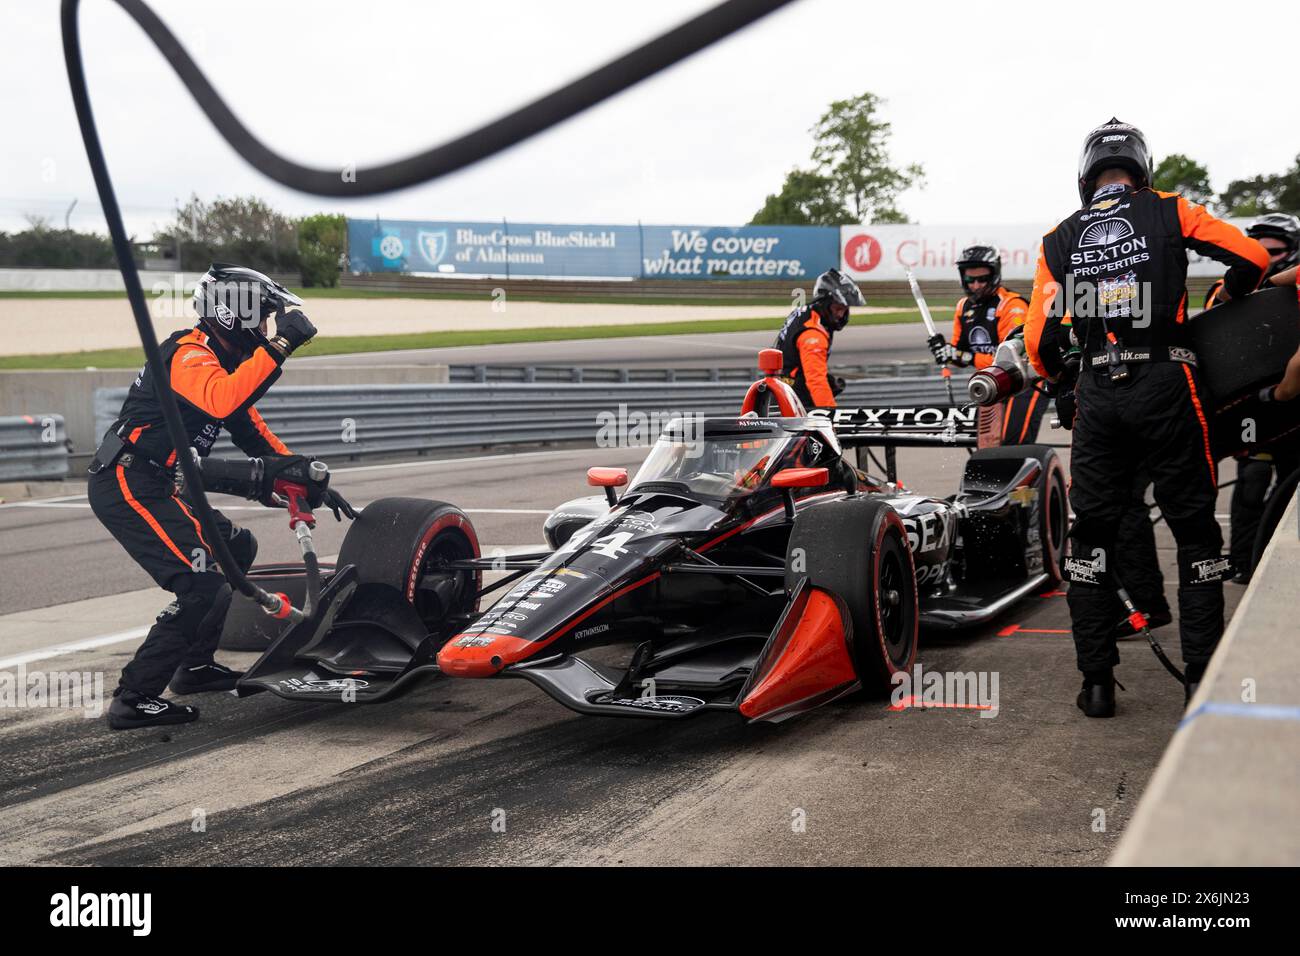 The crew of AJ Foyt Racing perform a pit stop during the Children's of Alabama Indy Grand Prix at the Barber Motorsports Park in Birmingham AL.(Credit Image: © Grindstone Media Group/Aspinc/Colin Mayr/Cal Sport Media) Stock Photo